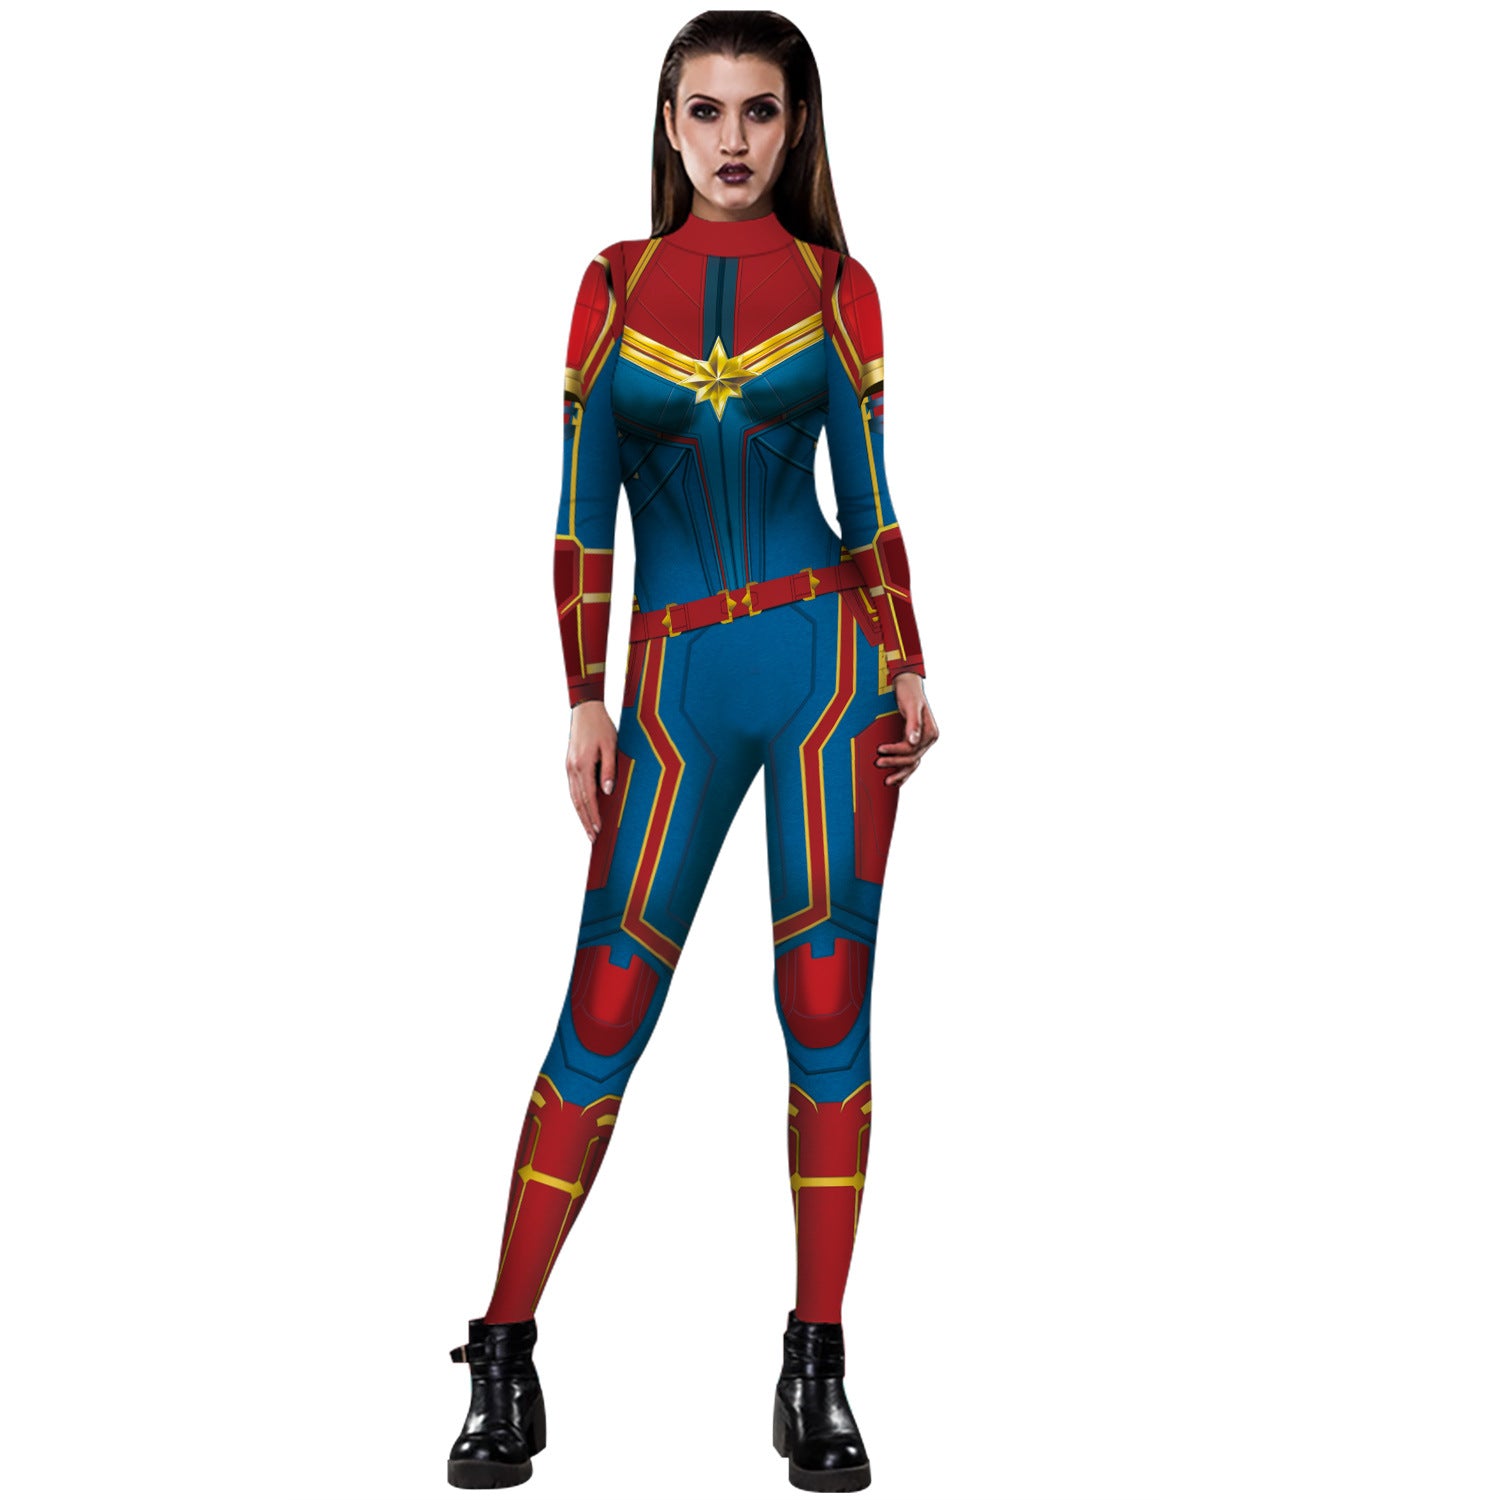 Women's Marvel Digital Printed Wear Clothes Tight Jumpsuits